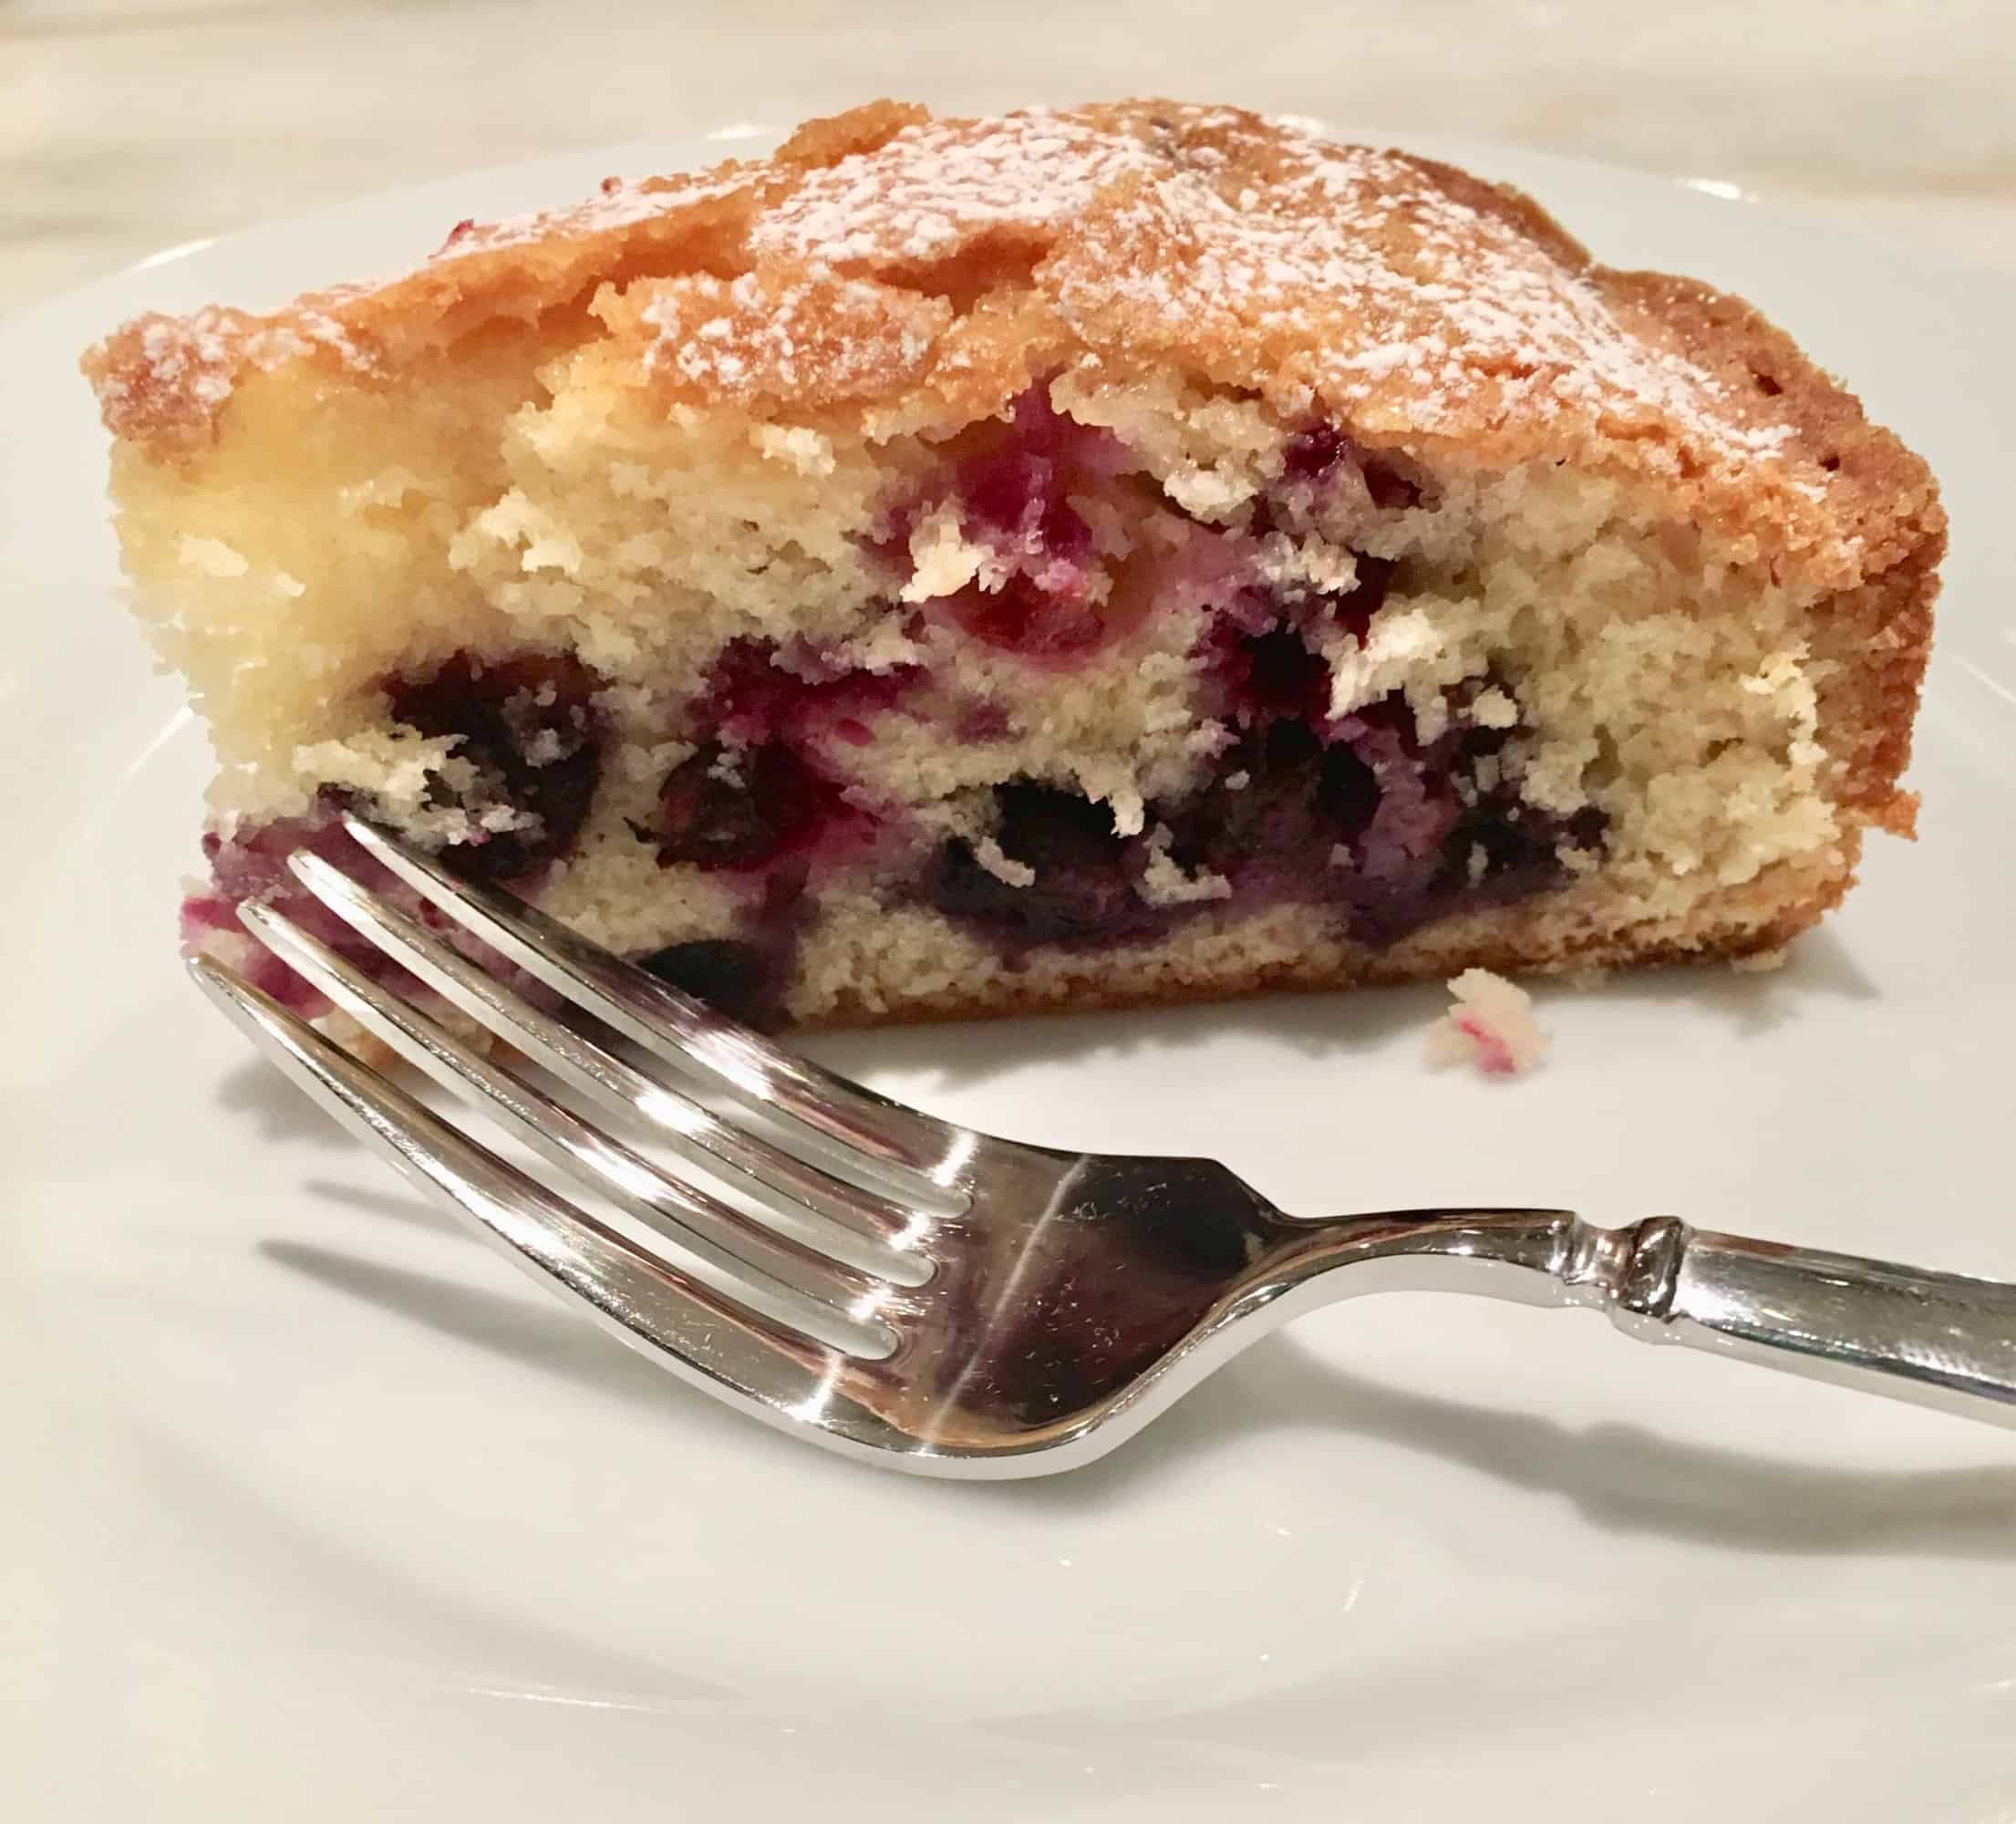 Blueberry-Muffin Cake from Fine Cooking